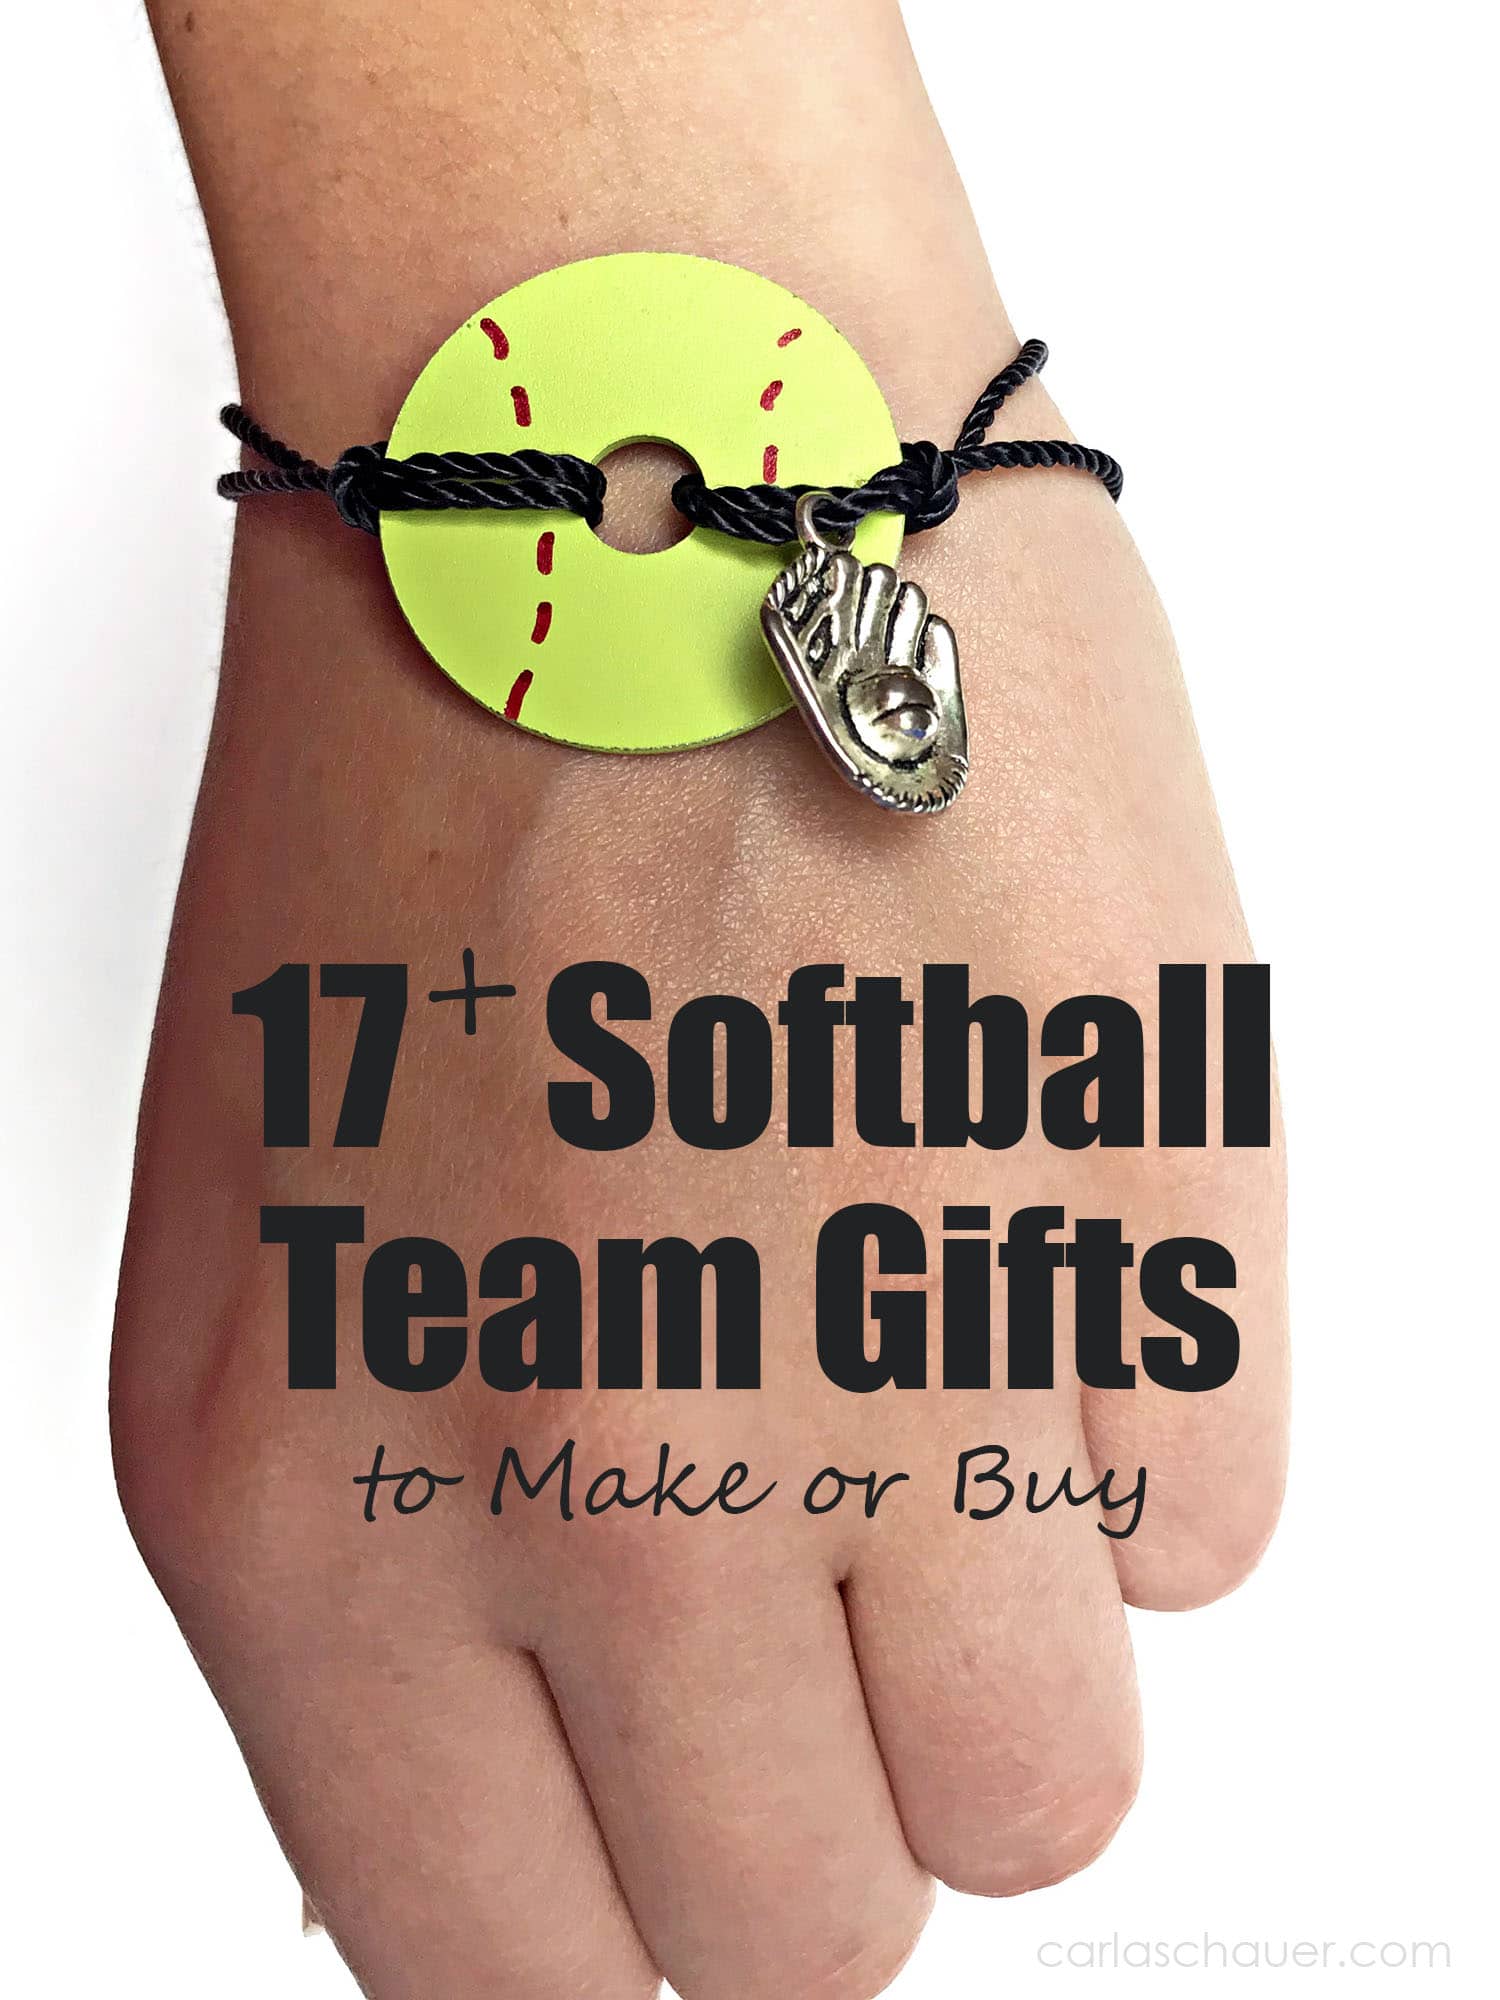 Team Gifts, Team Definition, Team Gift, Gift for Team, Employee  Appreciation, Employee Appreciation Gifts, Employee Gifts, Team Building -  Etsy | Employee appreciation gifts, Employee gifts, Staff gifts